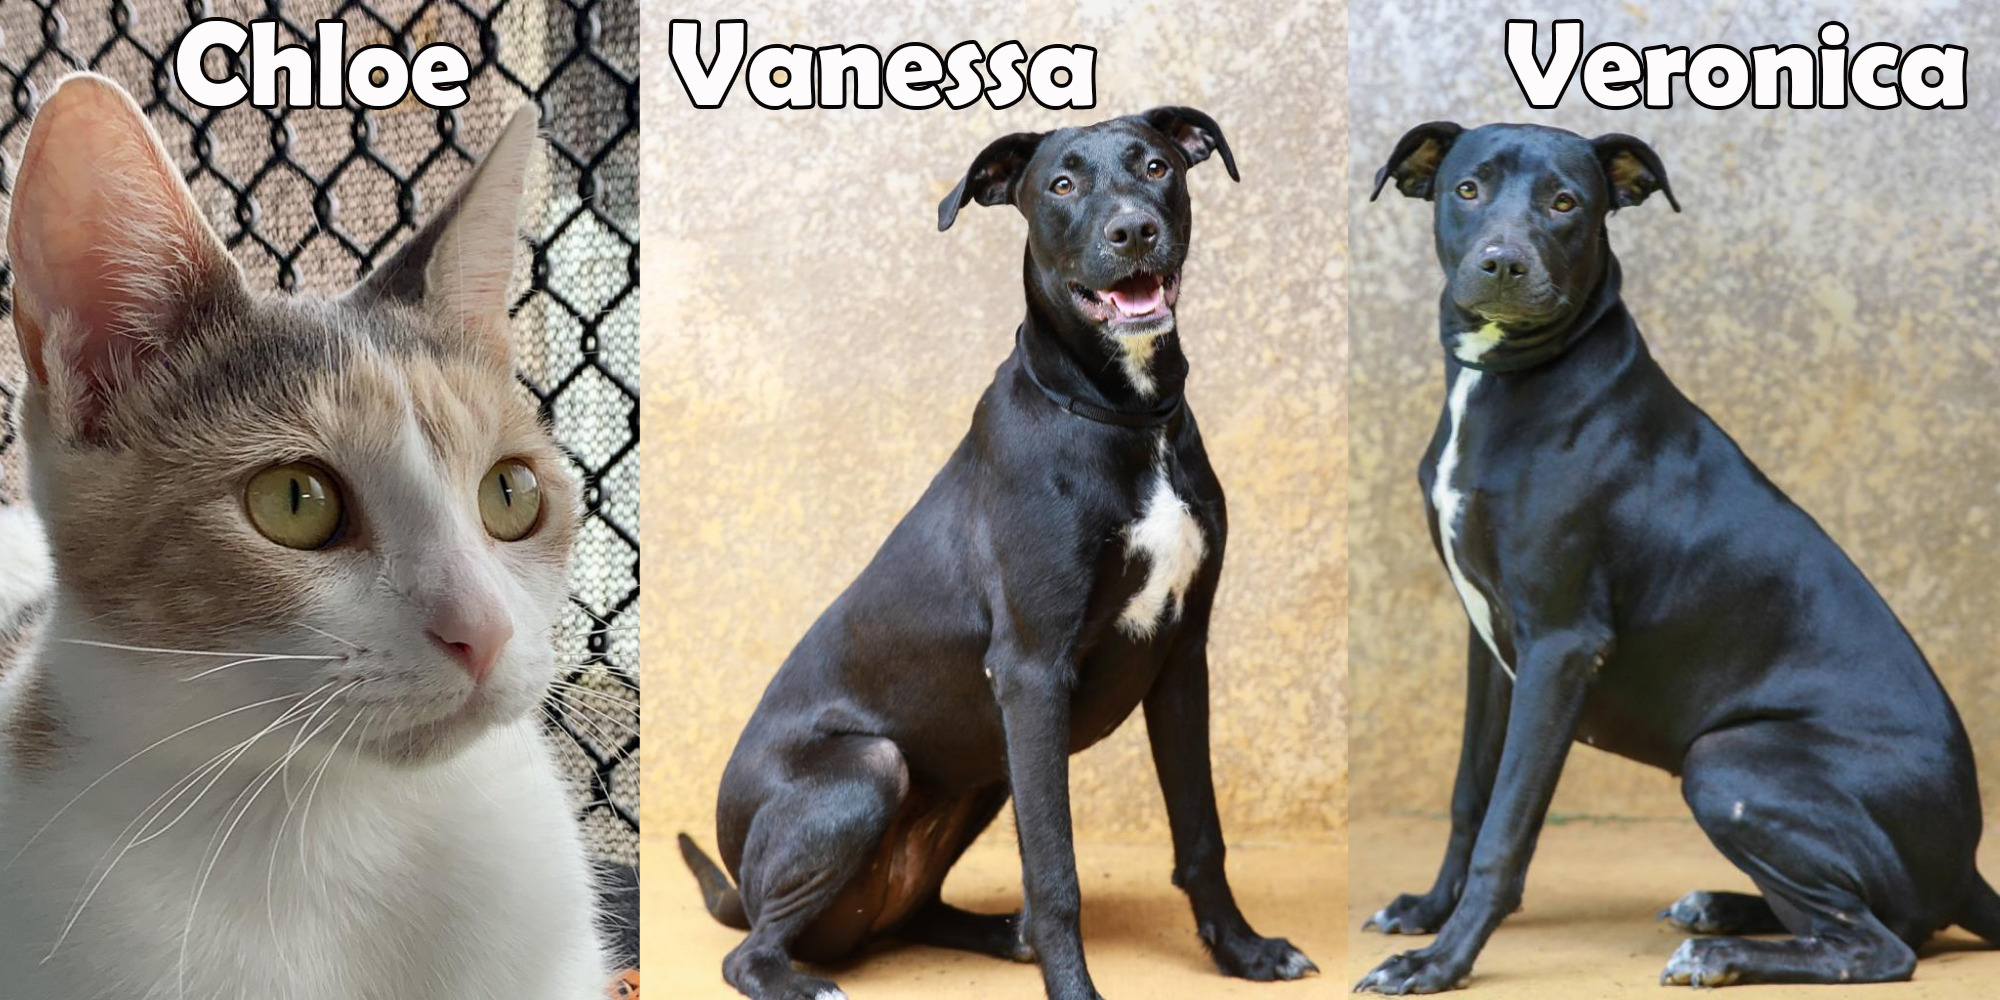 Chloe, Veronica and Vanessa are our featured pets this month.